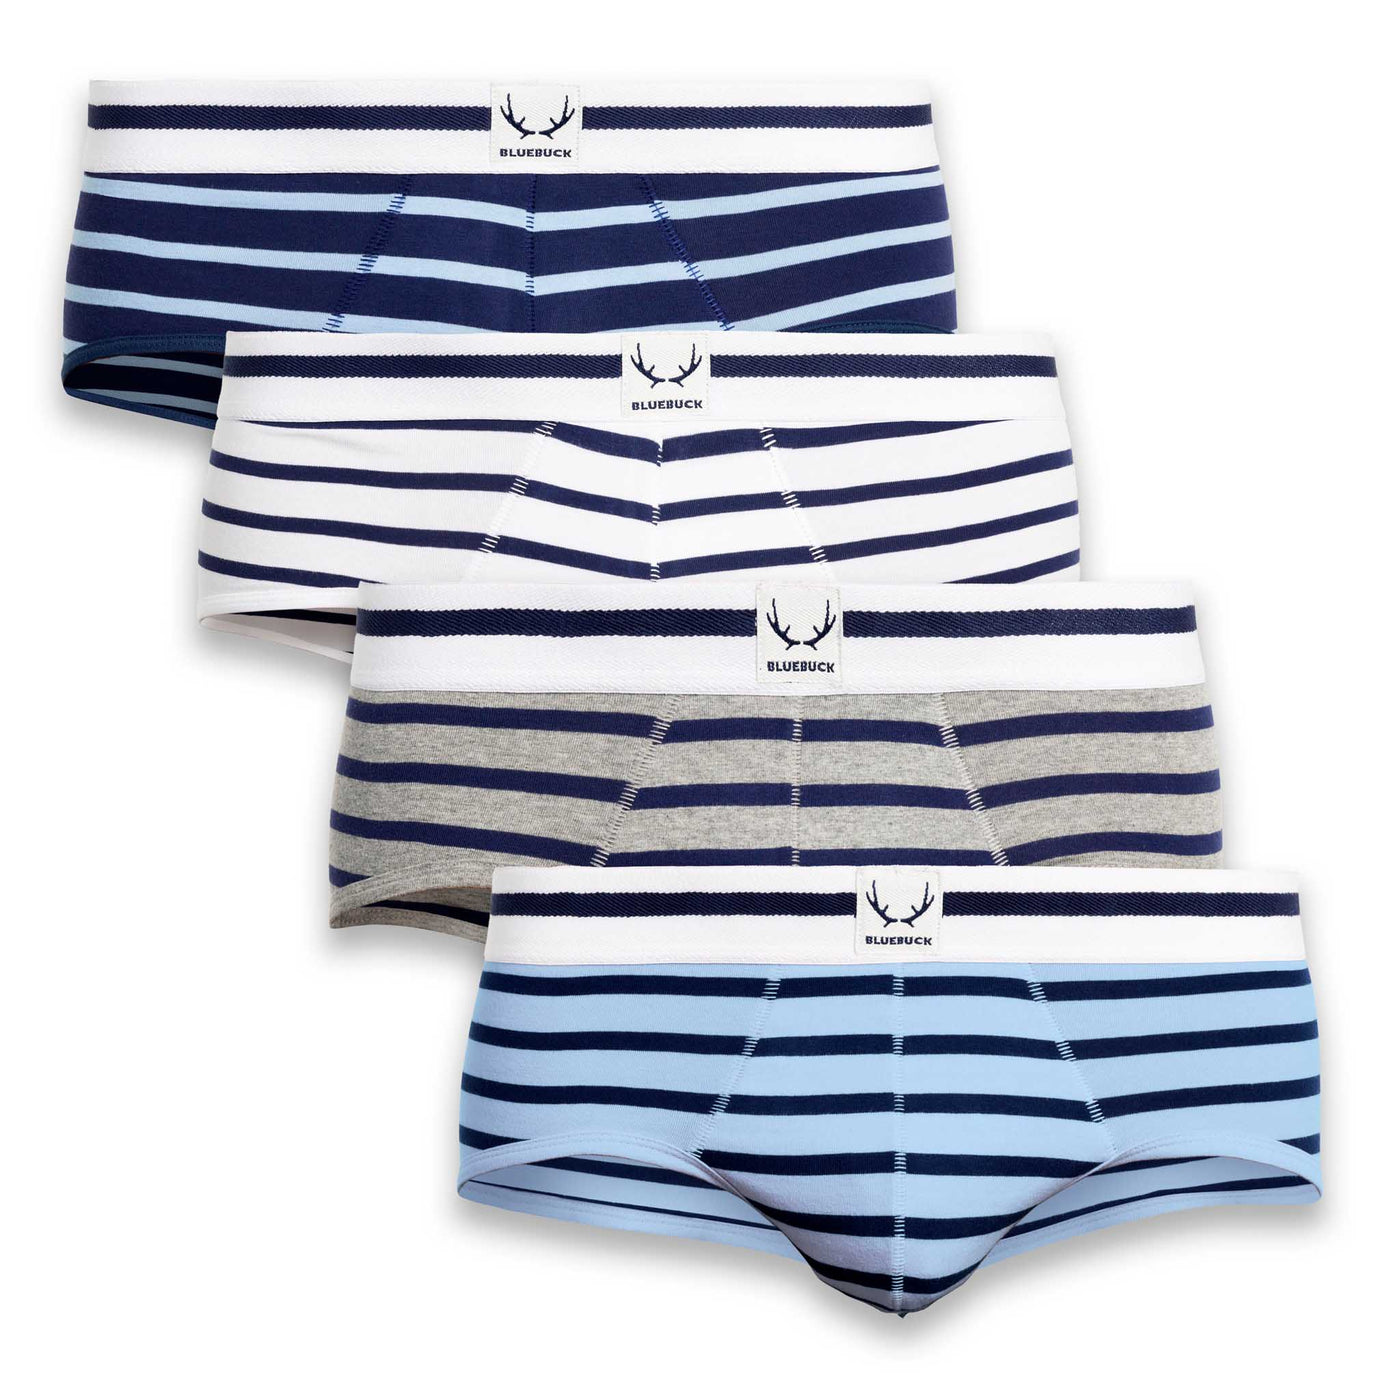 4 nautical men's briefs with stripes in organic cotton